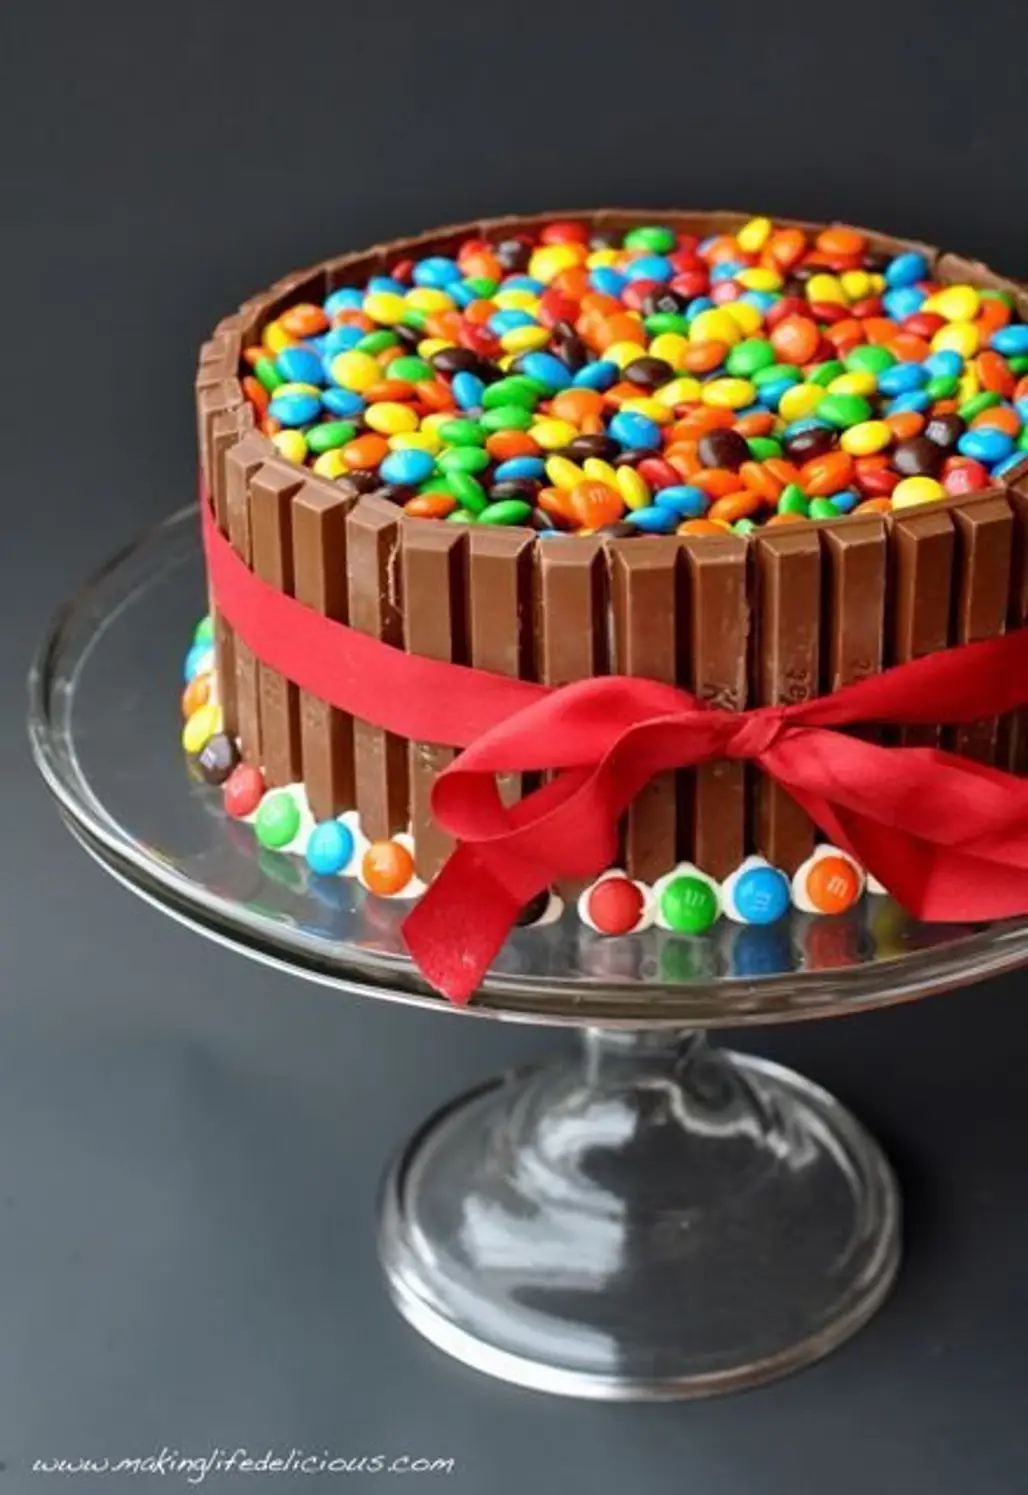 Colorful Candy Cake